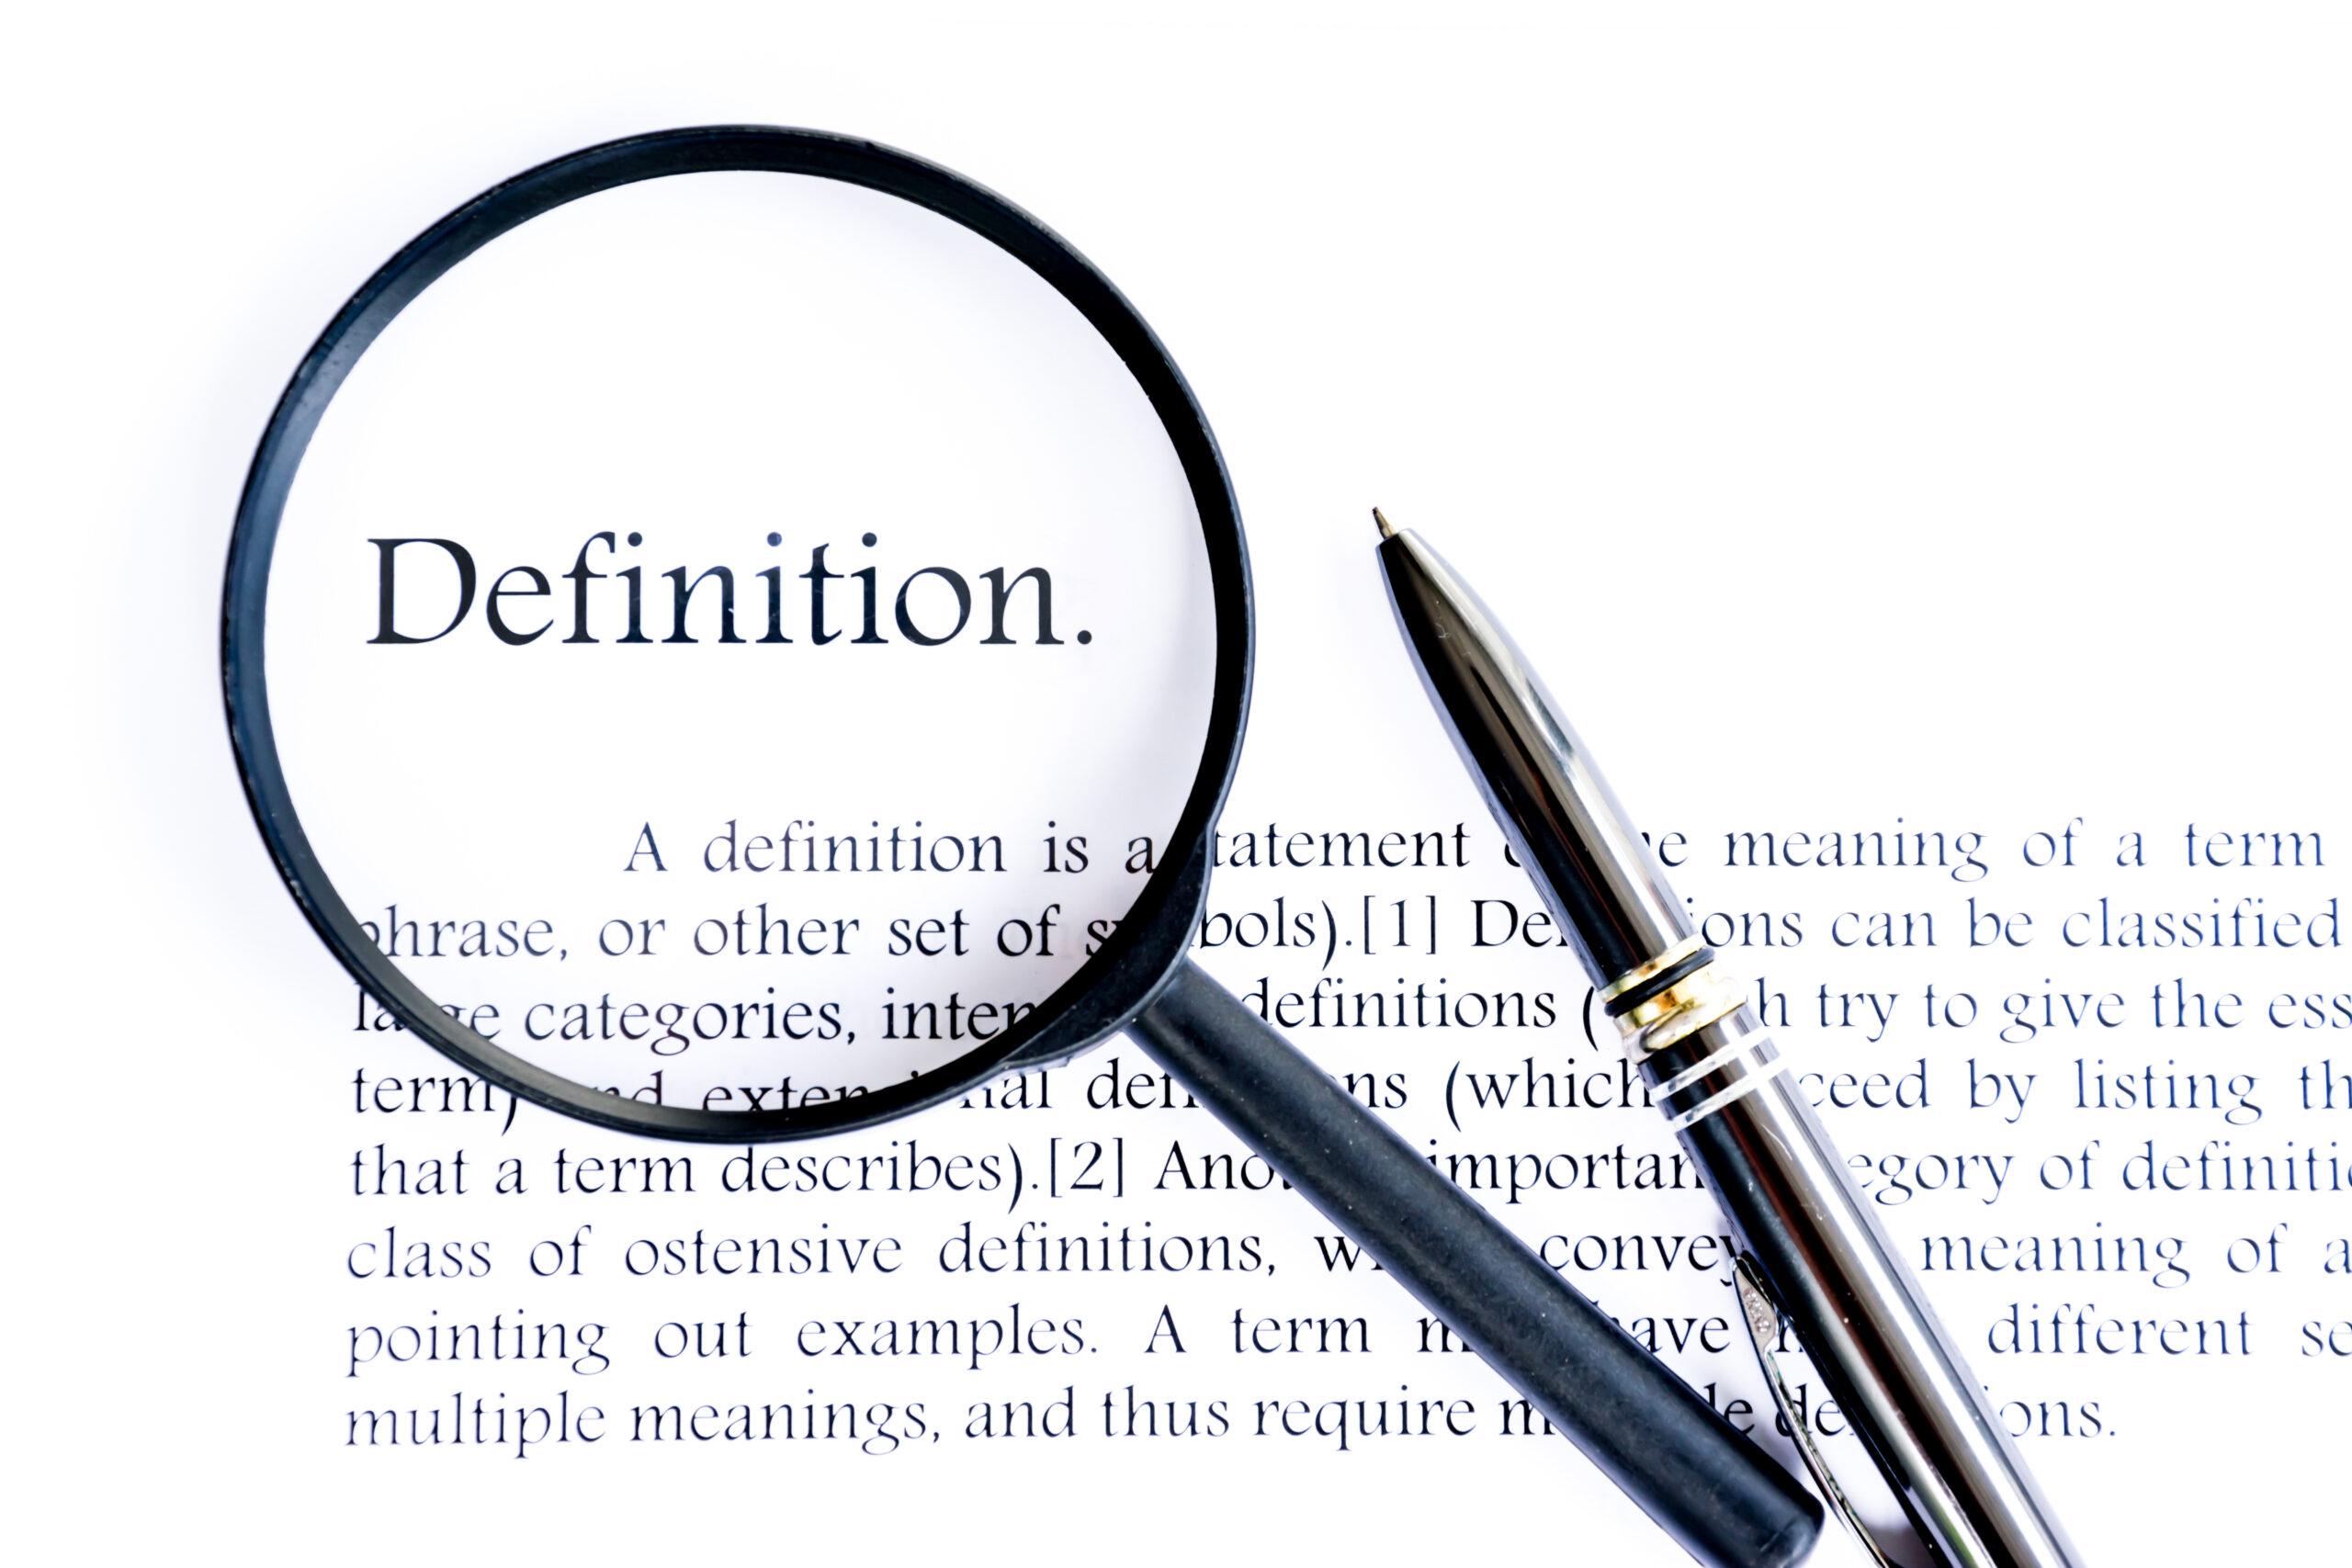 The word "Definition" under a magnifying glass and the definition of the word below